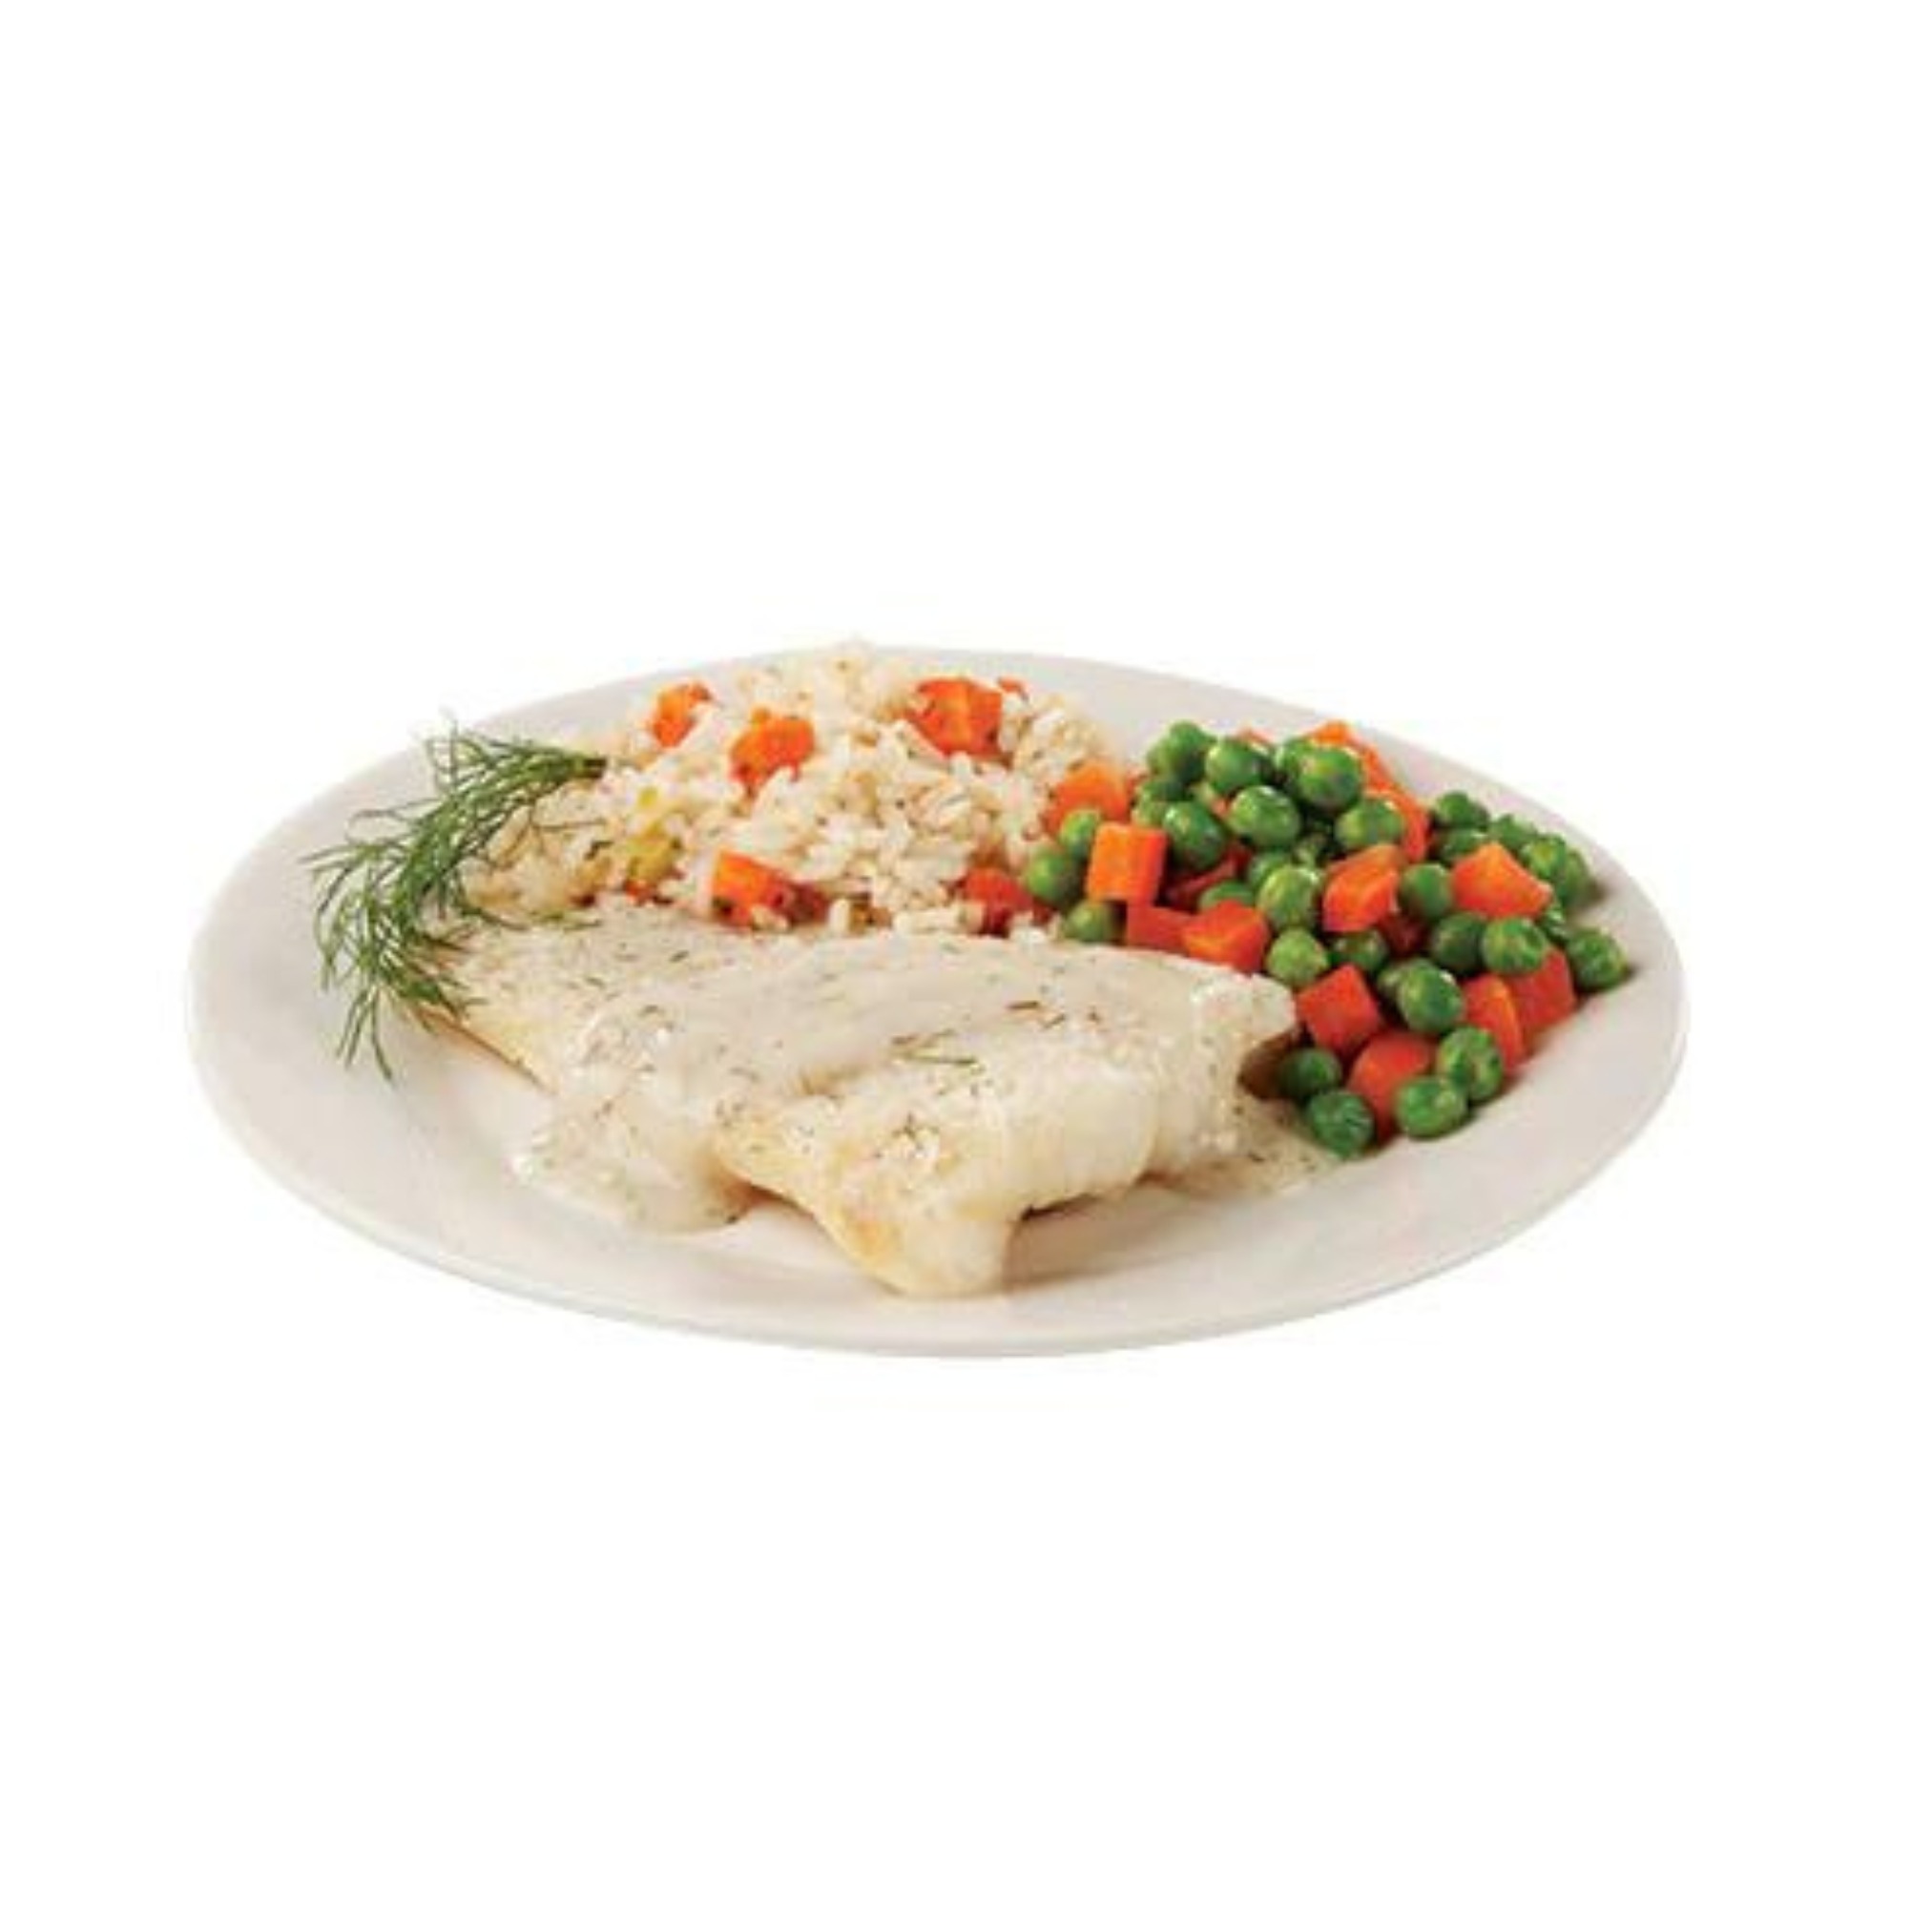 Cod with Dill Sauce